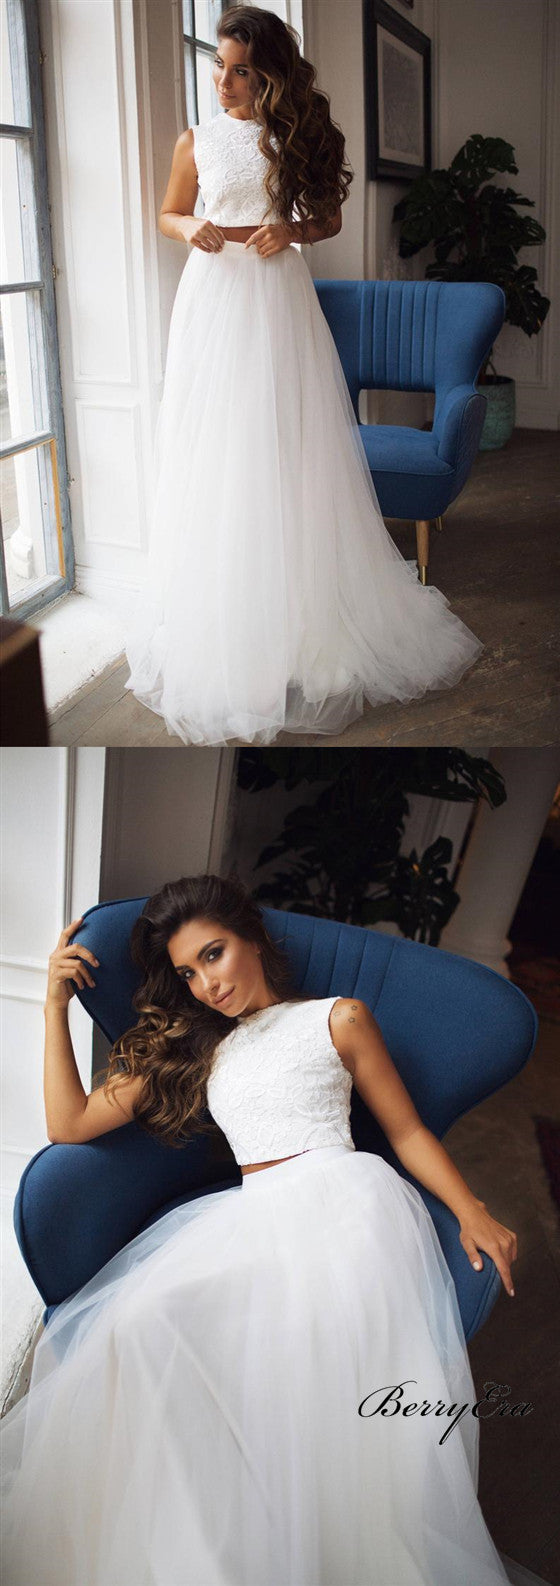 2 Pieces Lace Top Ivory Tulle Skirt Long Wedding Dresses, Bridal Gown